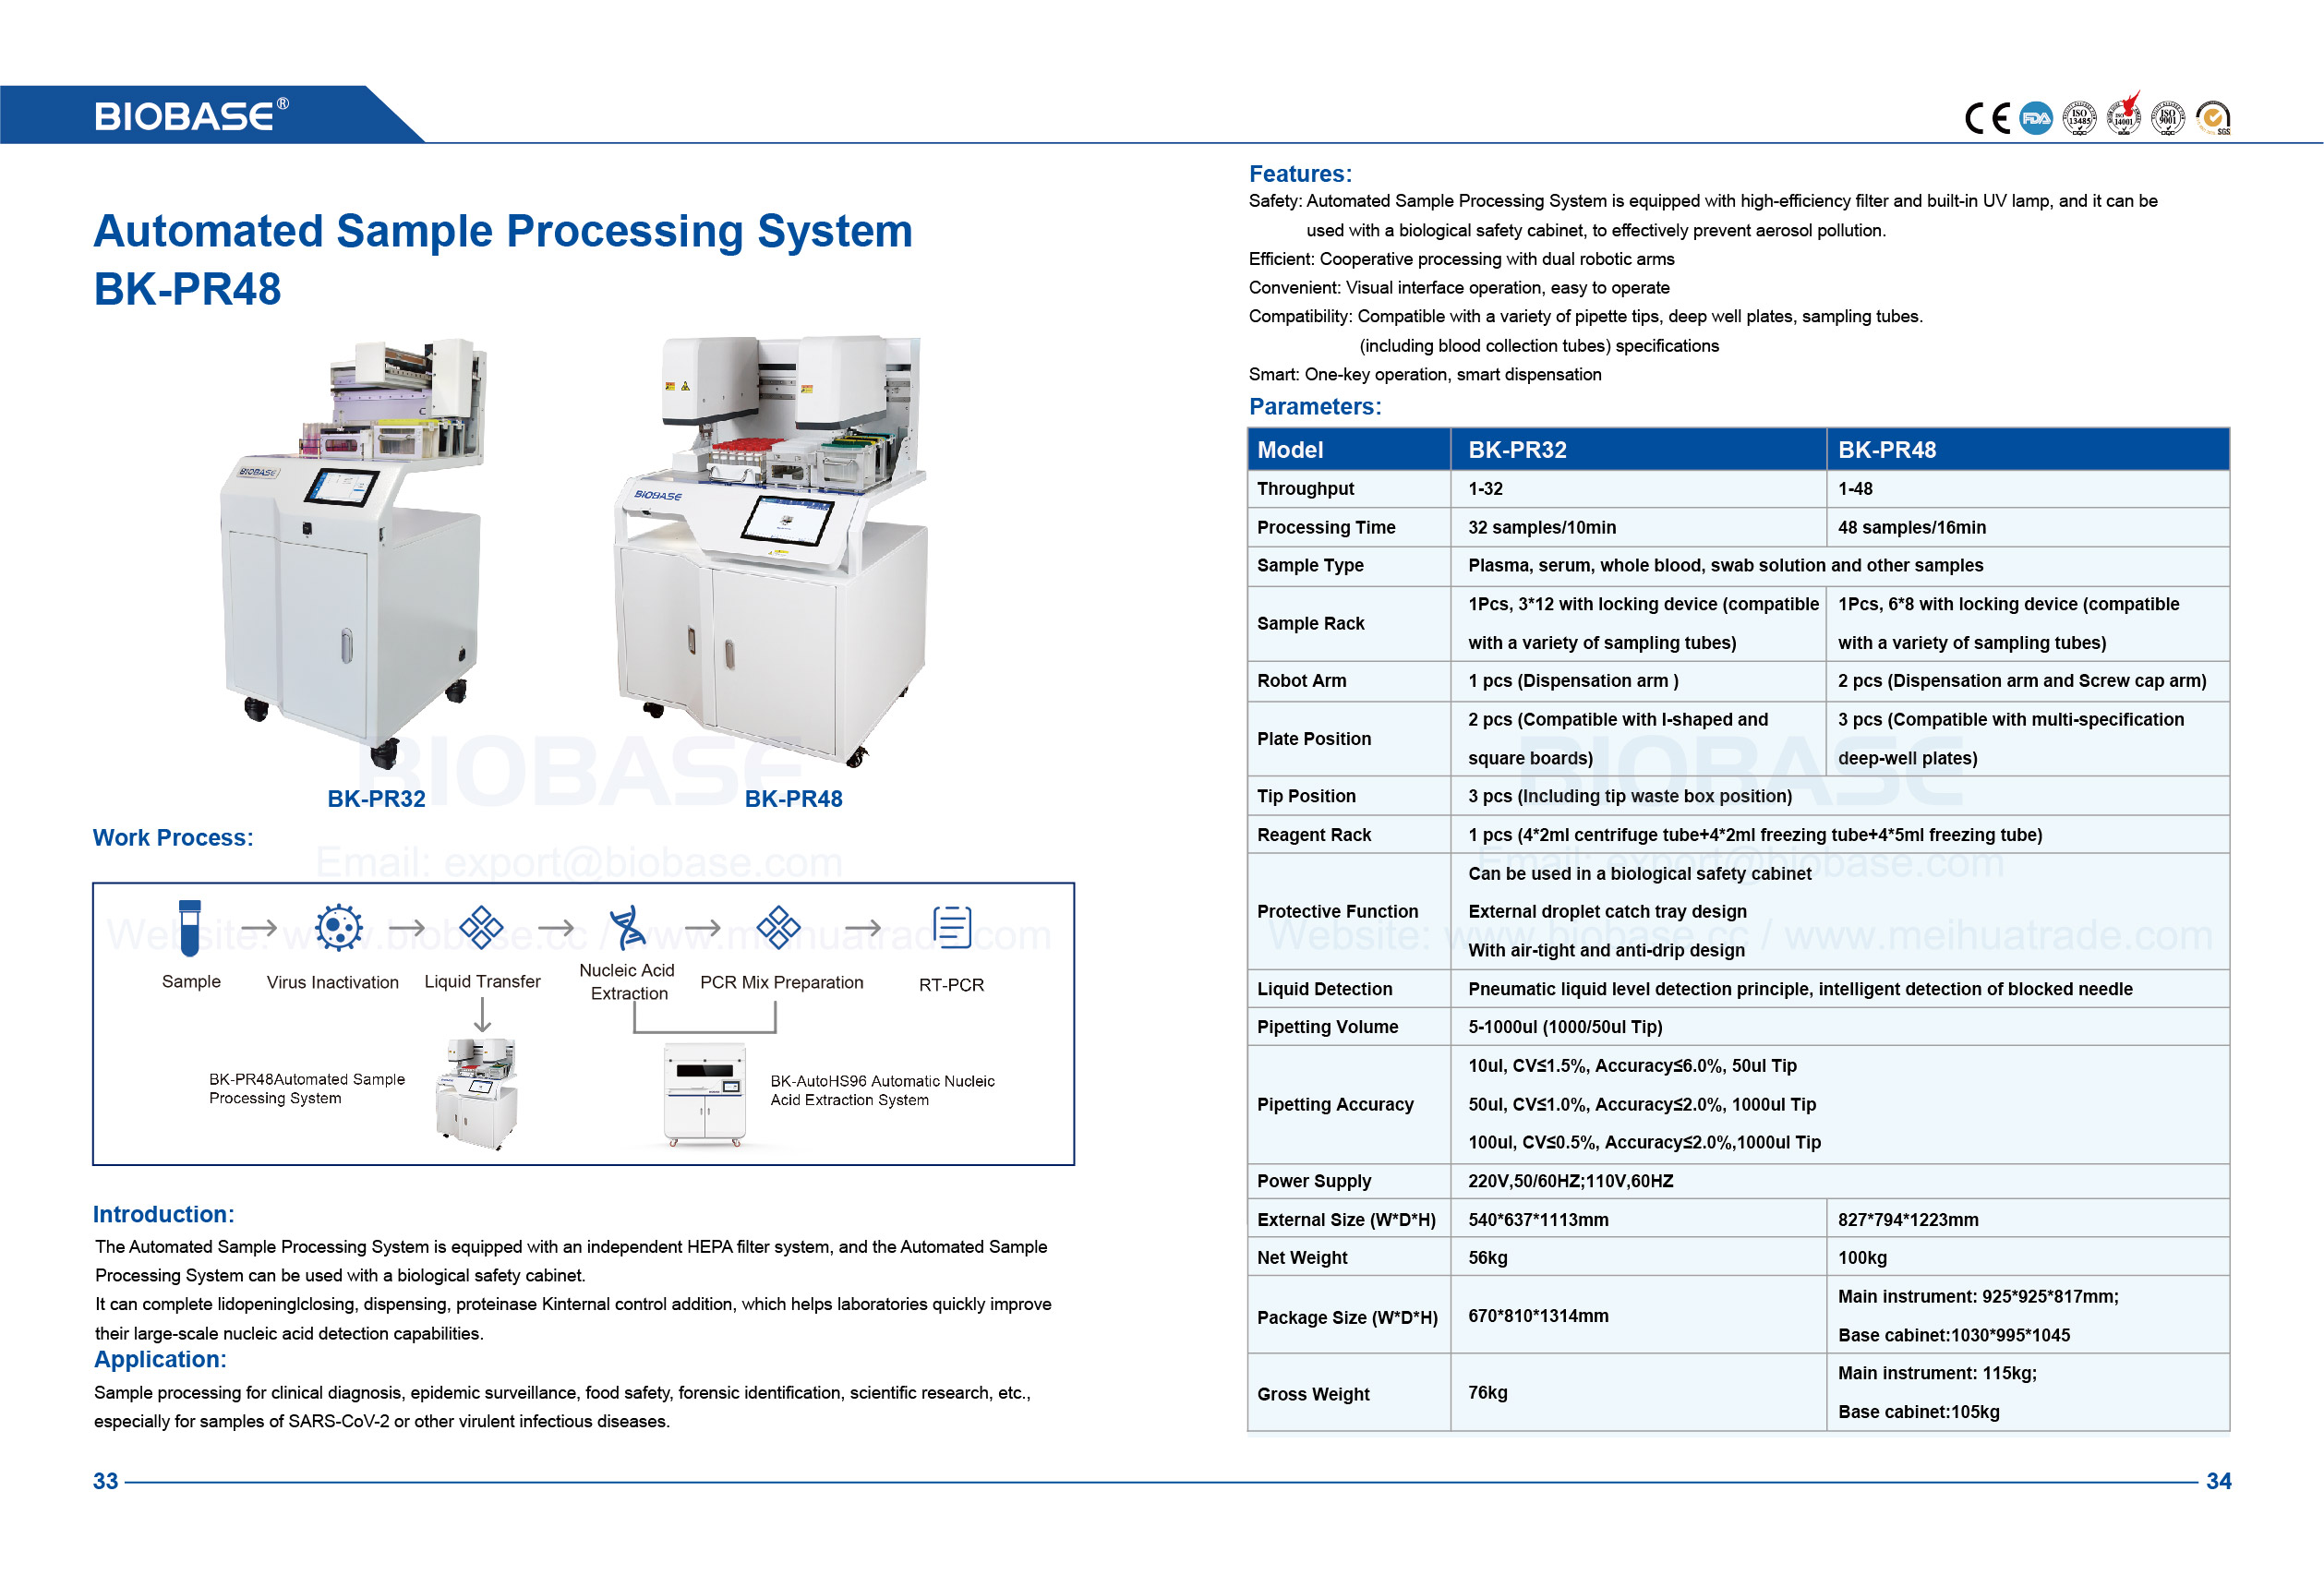 33-34 Automated Sample Processing System BK-PR48